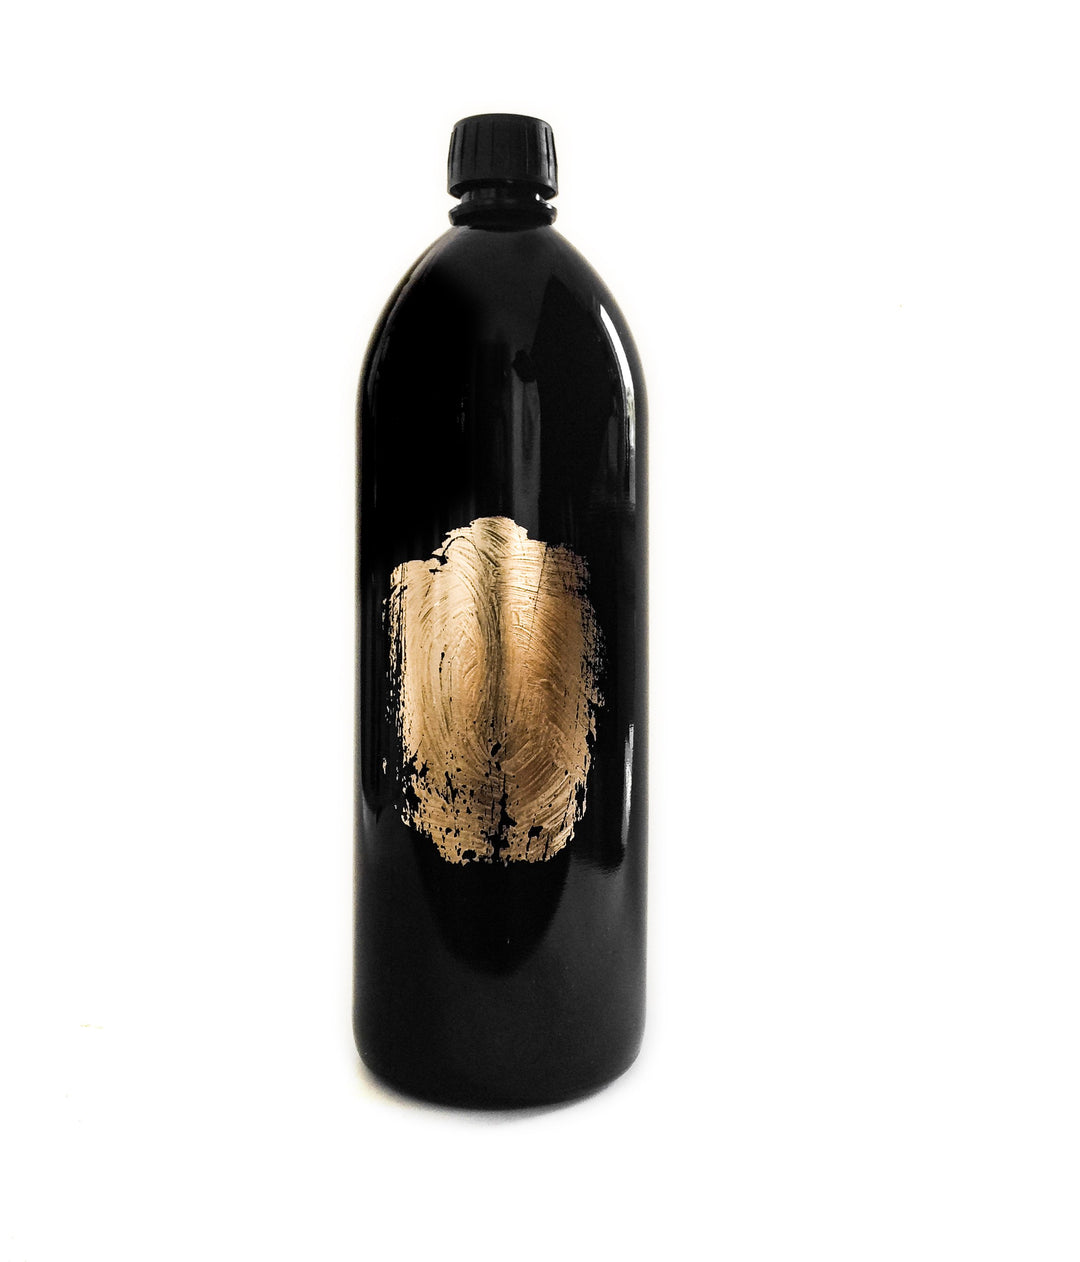 W/S 'EMPIRE OF THE SUN FLASK / Biophotonic water bottle with hand-applied 22 karat gold leaf Sun / RP AUD 65